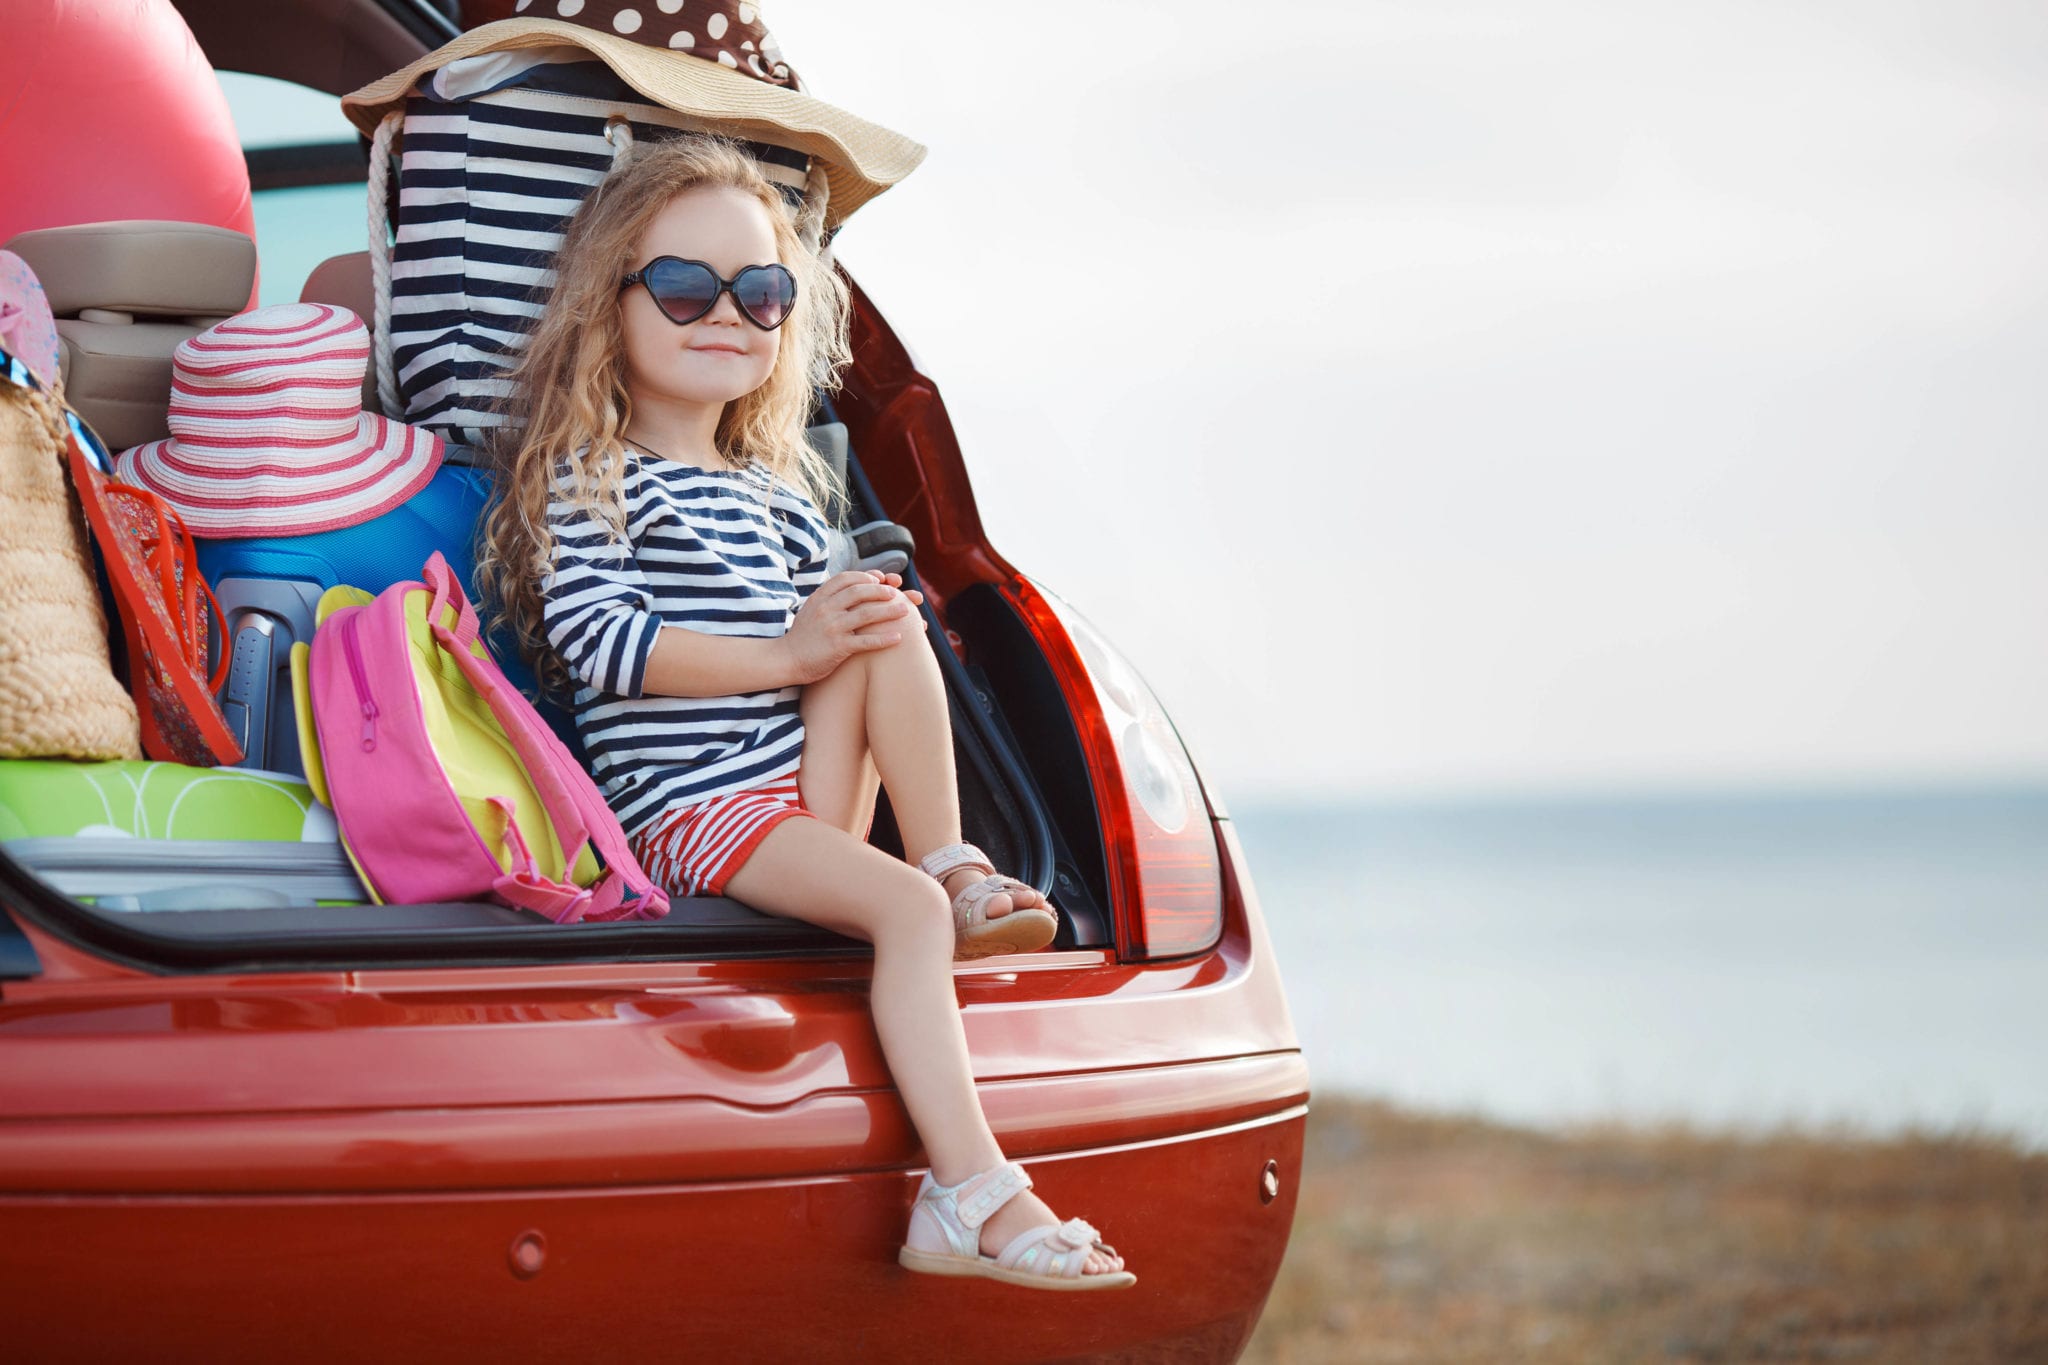 Young girl sitting in the open boot of a car with luggage and smiling